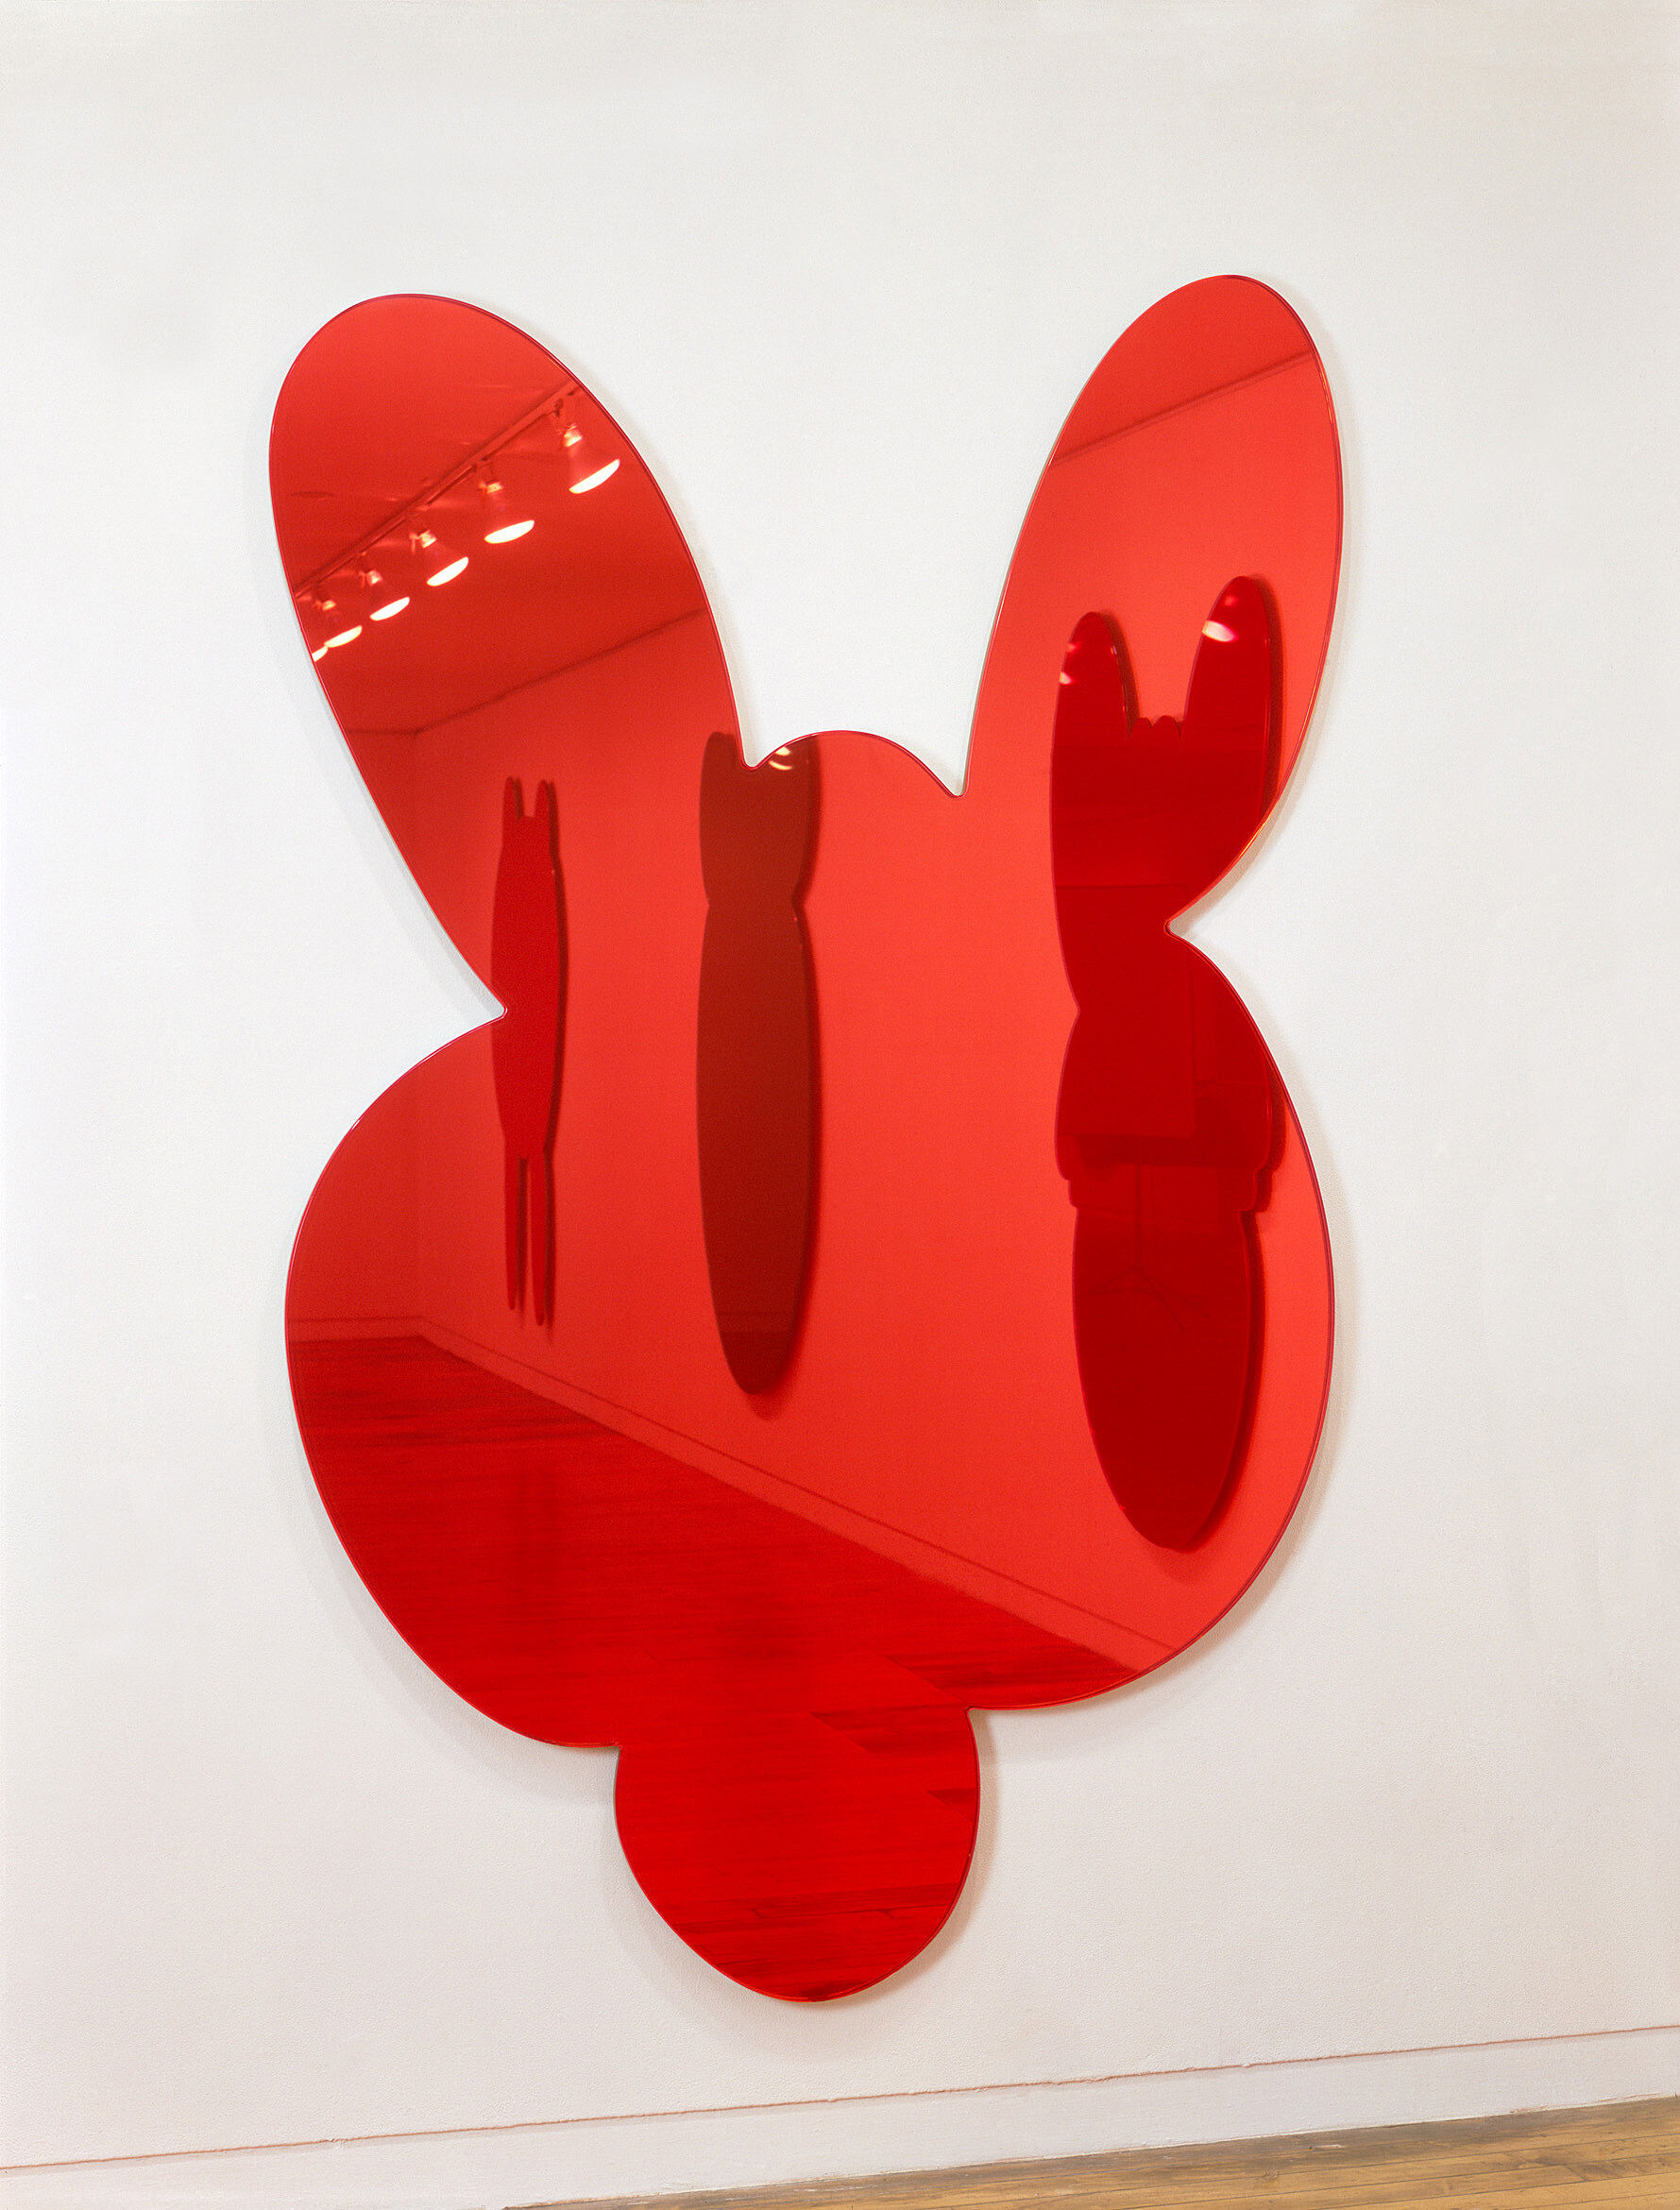 A red-tinted mirror shaped like the head of a kangaroo.